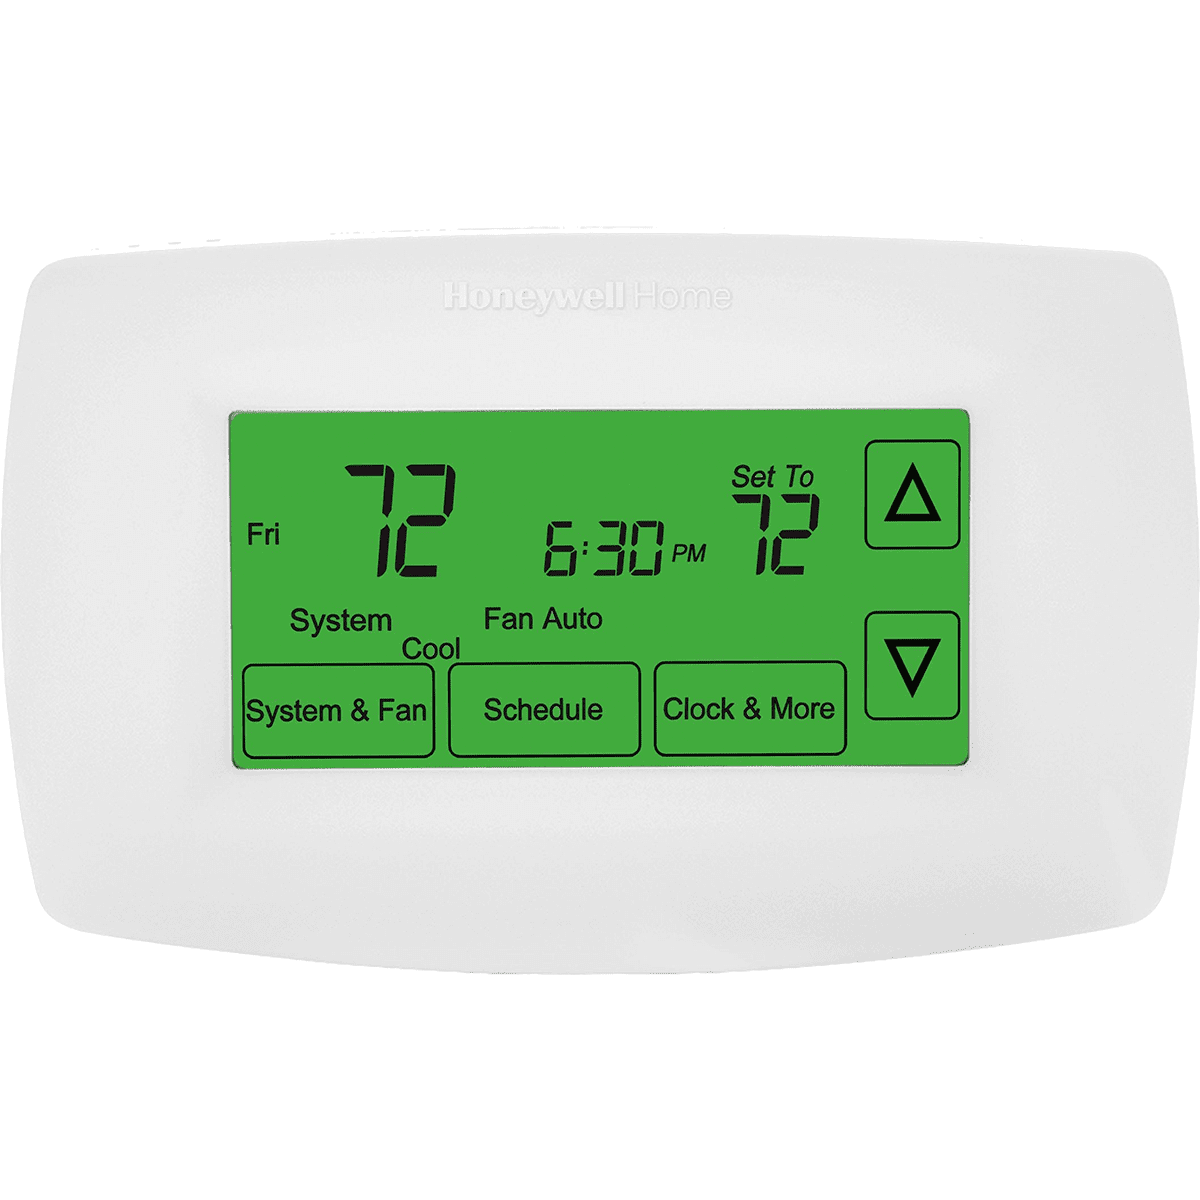 Honeywell Home 7 Day Programmable Thermostat w/ Touchscreen Display